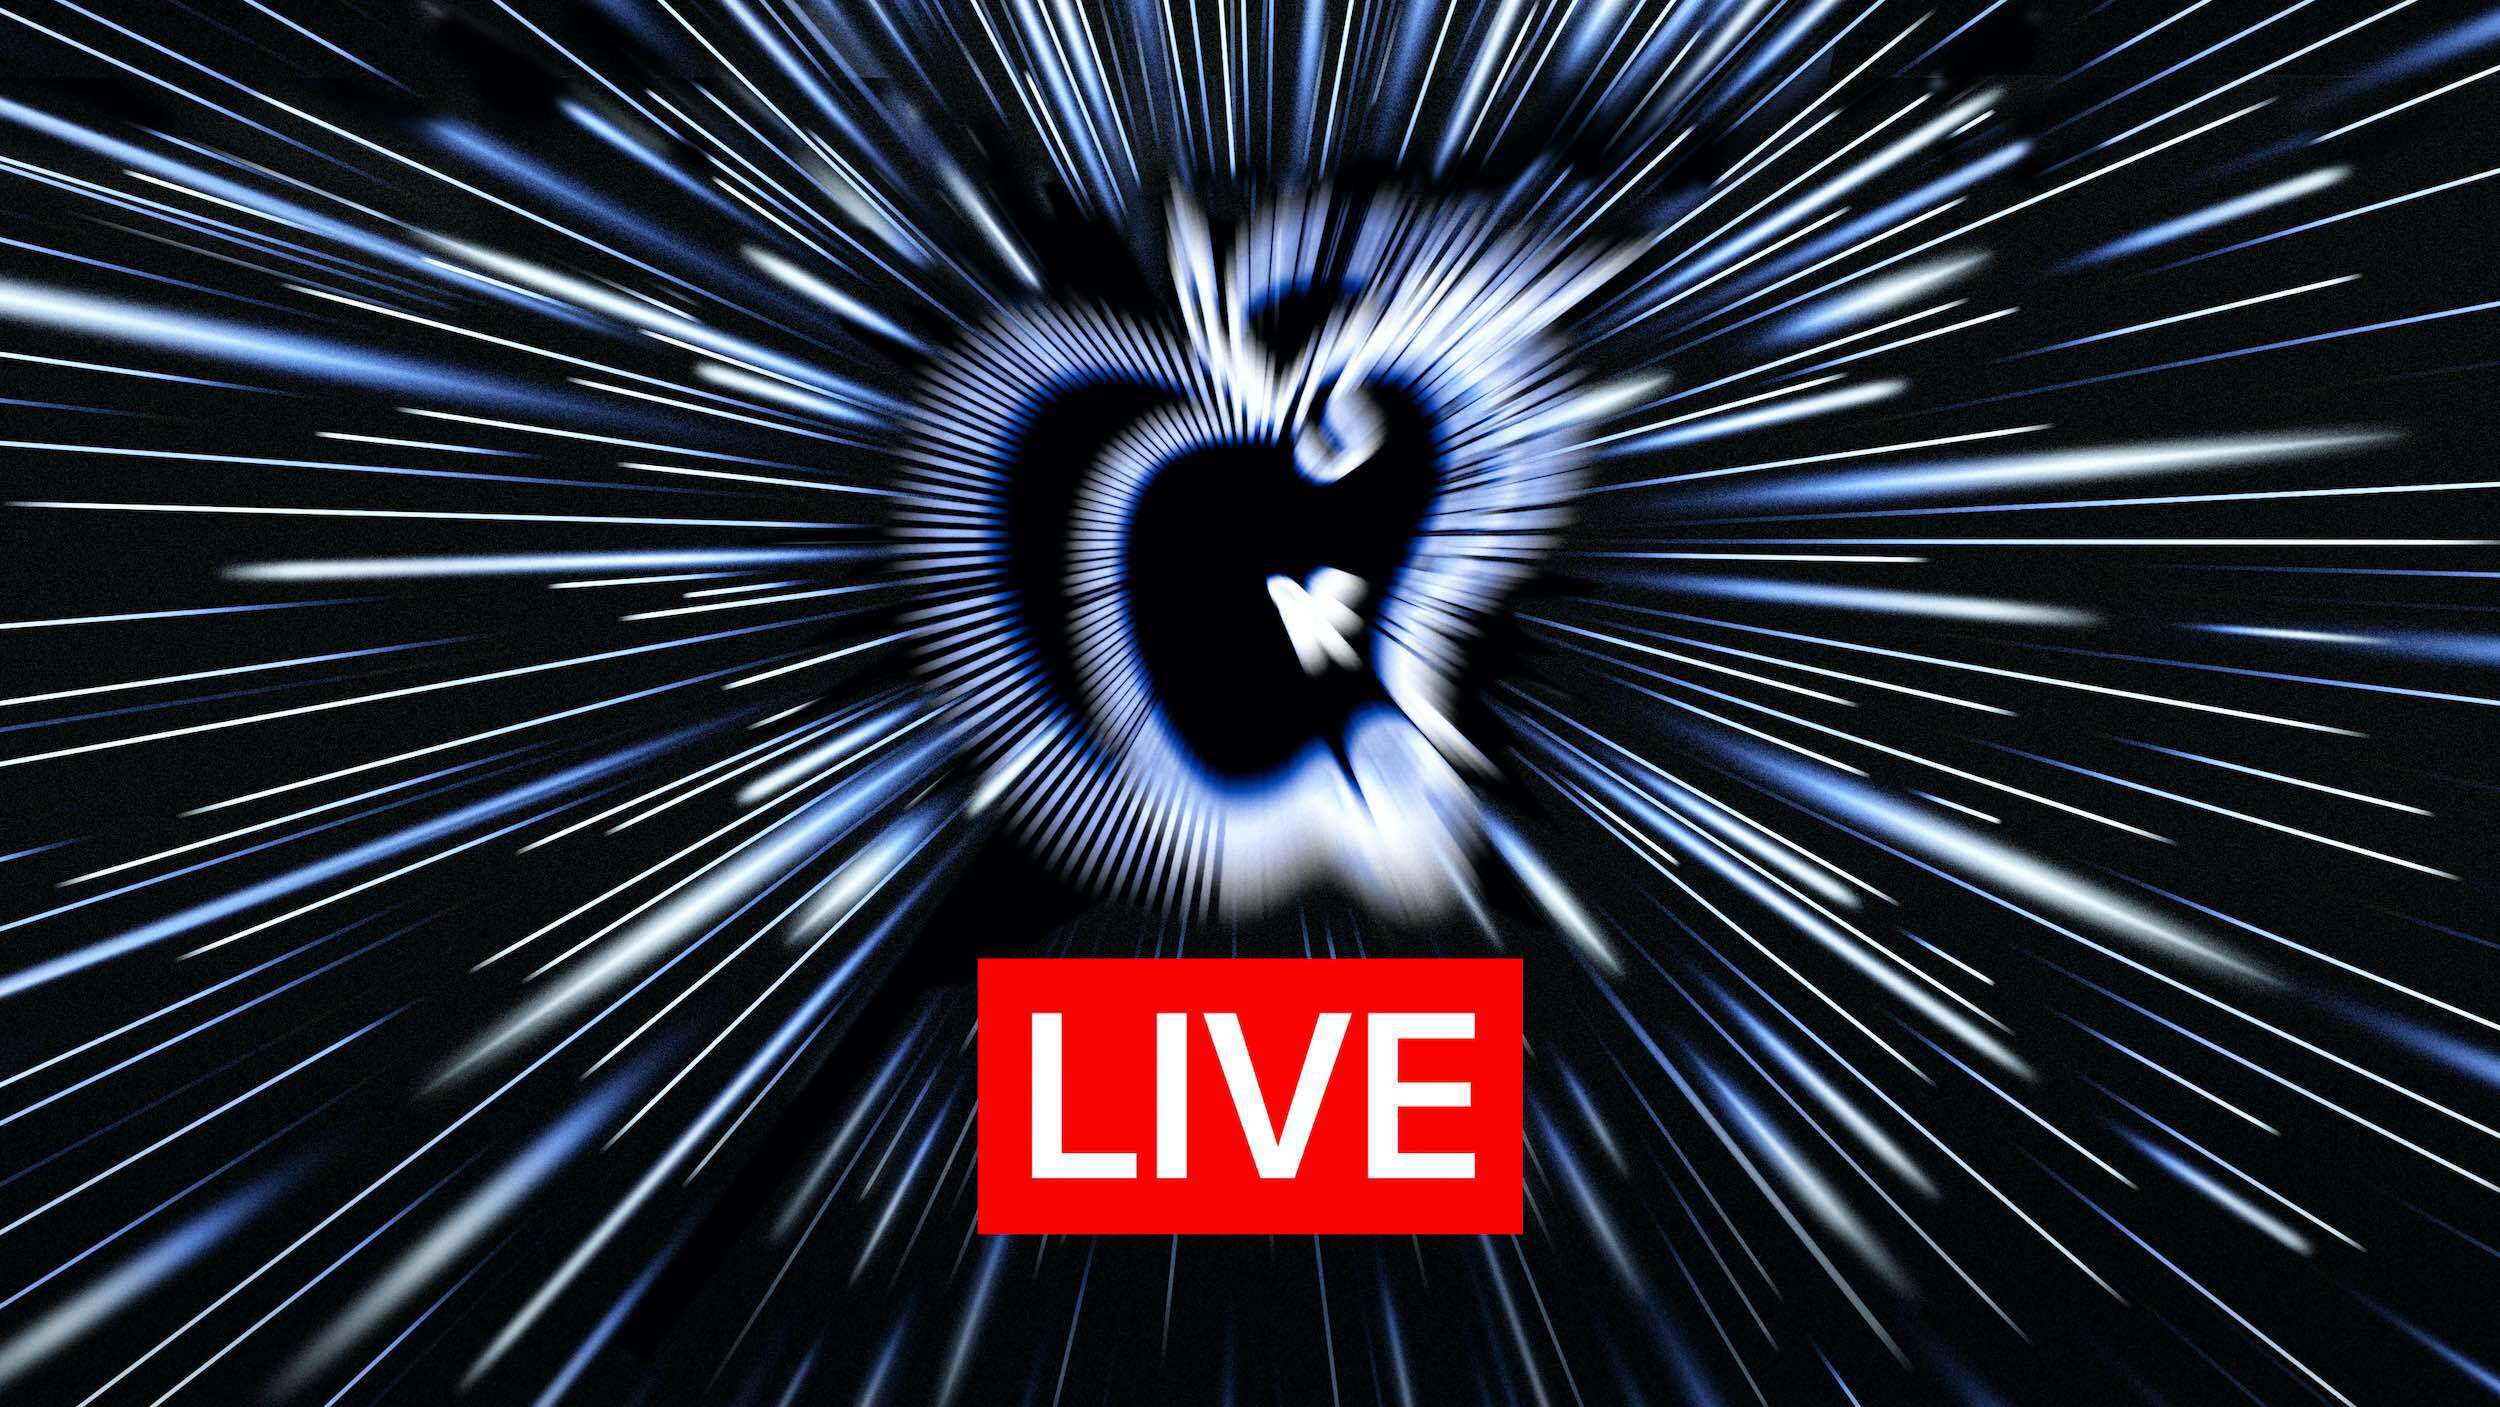 Apple Event Live Updates: MacBook Pro and More Expected